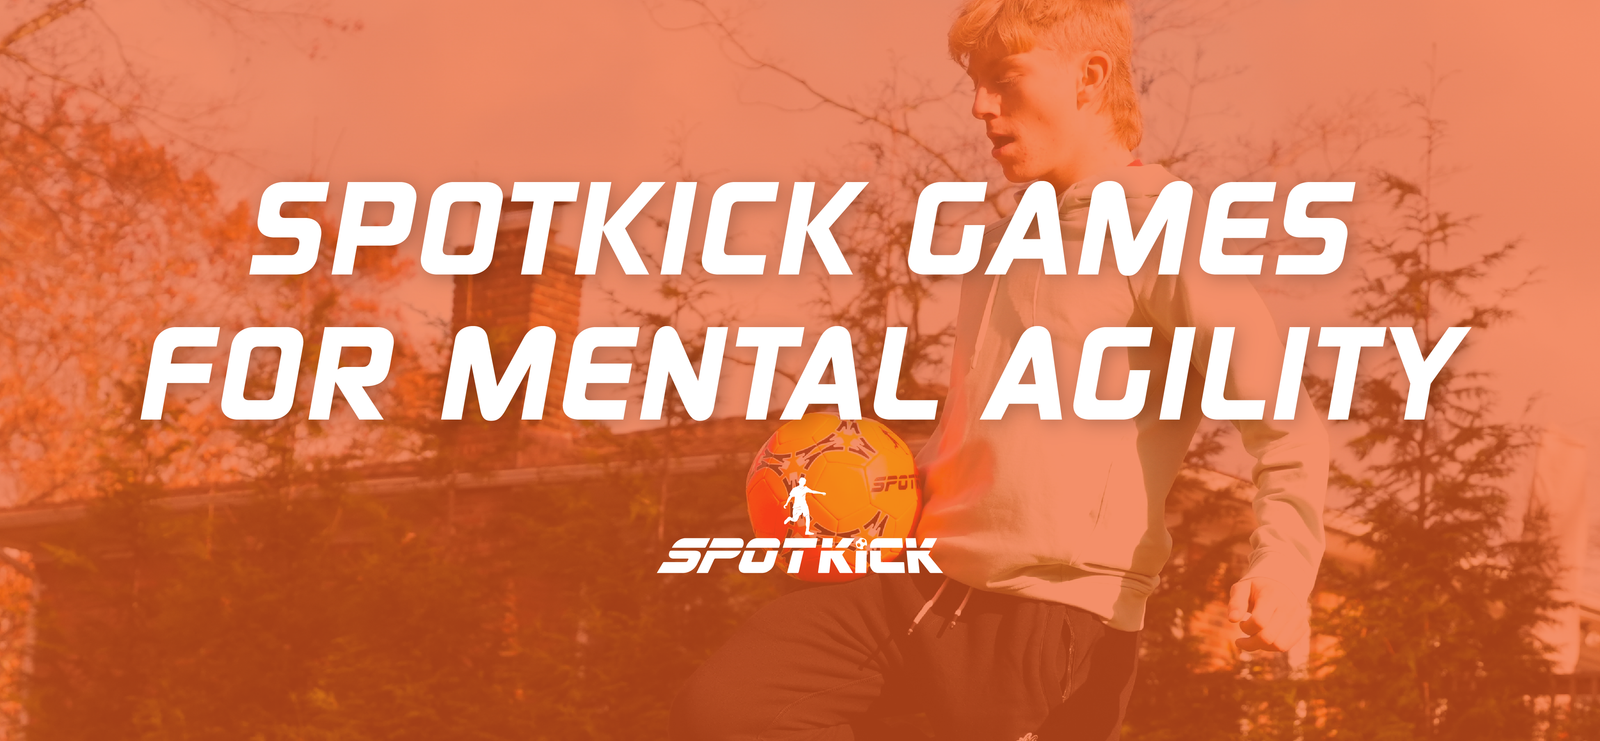 Spotkick Games, Soccer and Mental Agility, Spotkick Tailgate Games